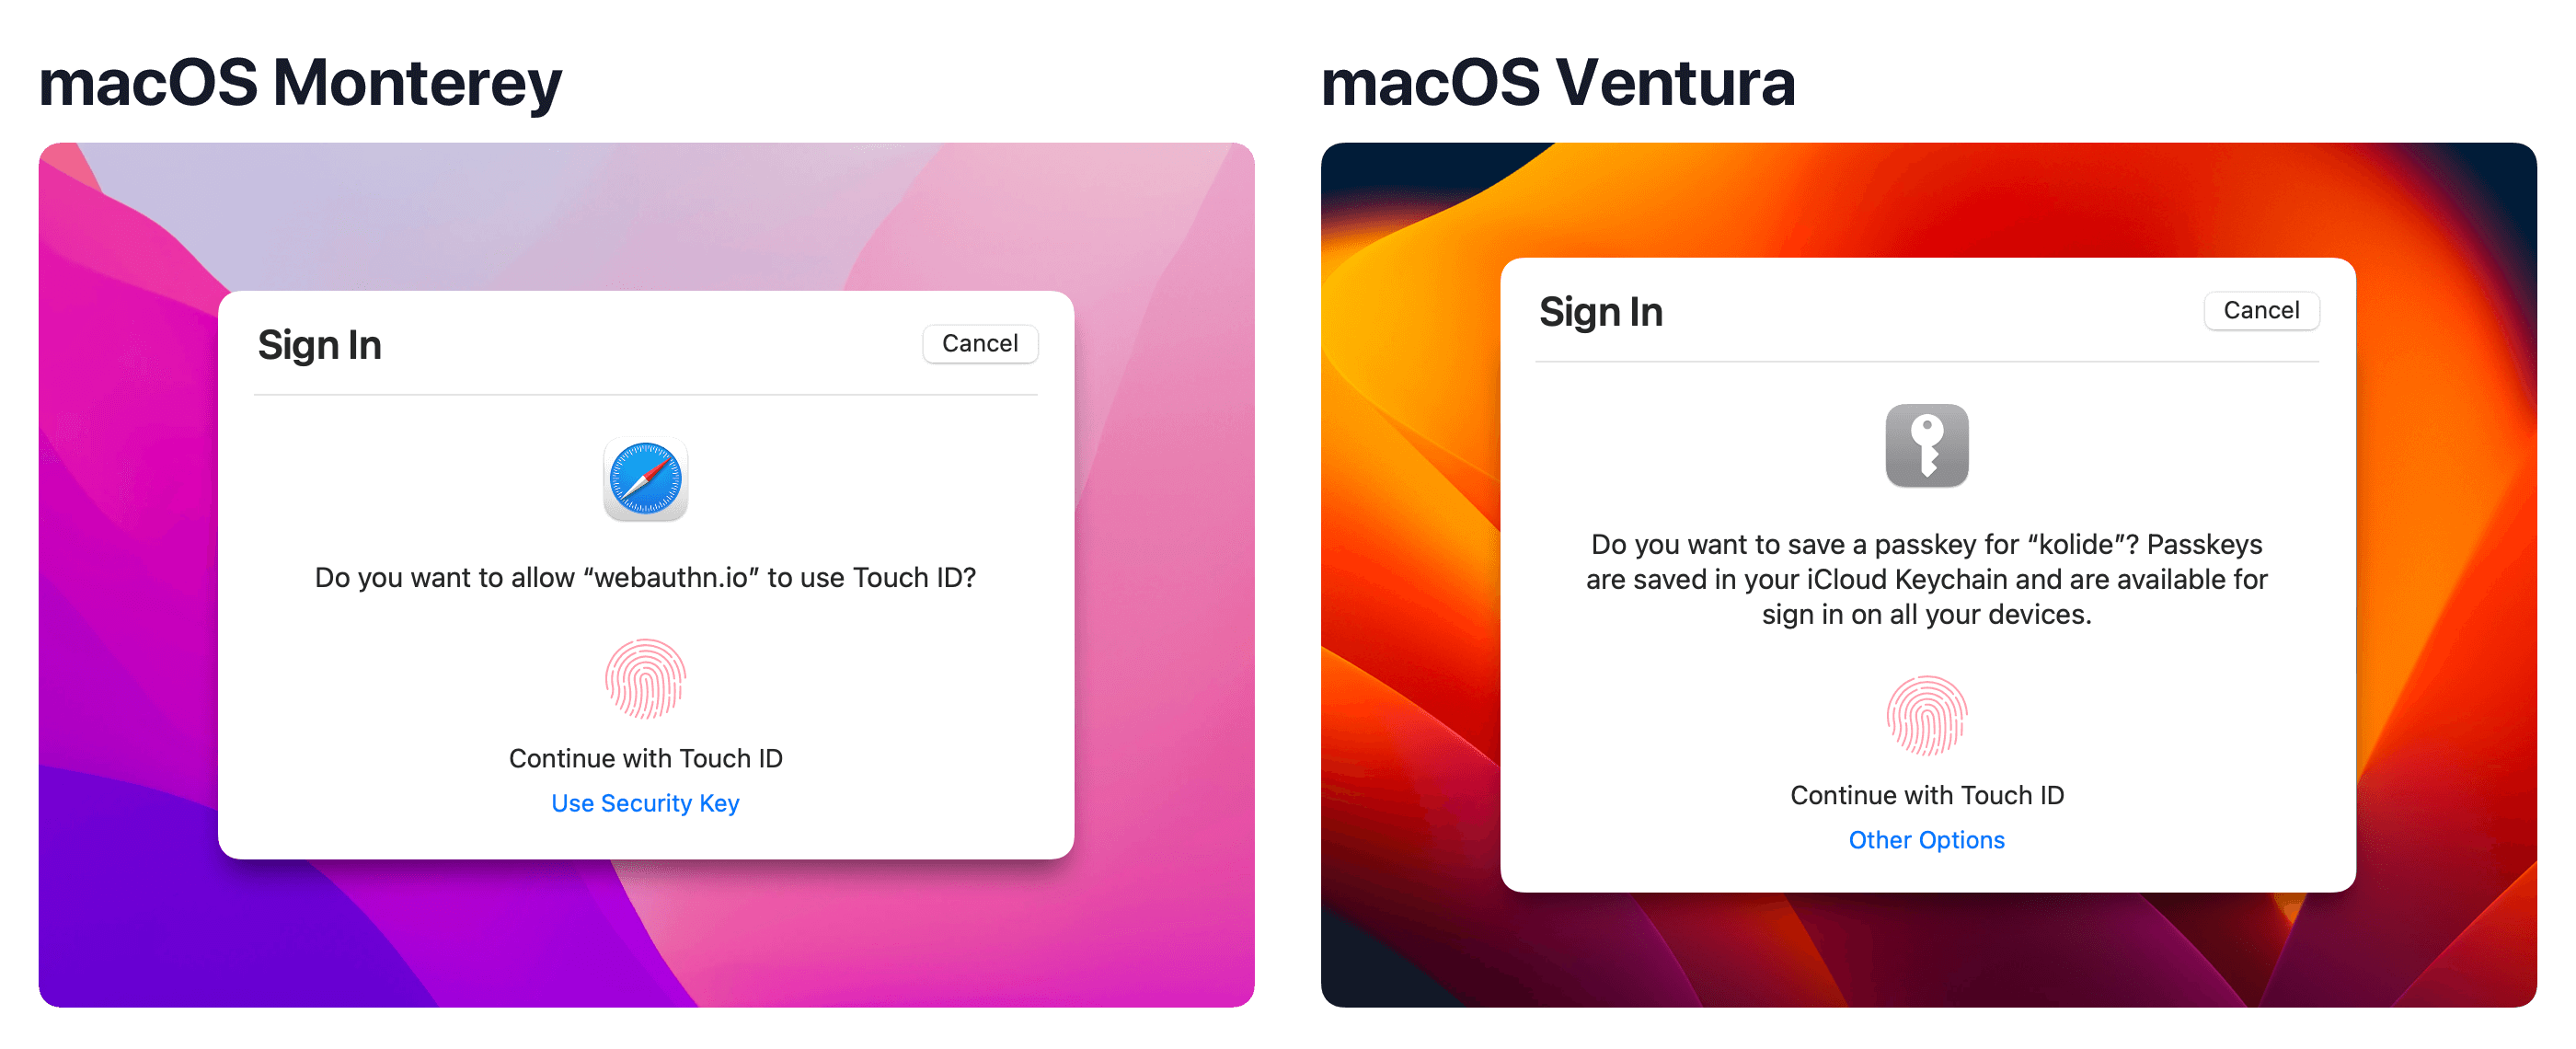 Side by side screenshots macOS Monterey and macOS Ventura and macOS the showing Webauthn sign in prompts. The Ventura prompt now asks the user to save a passkey